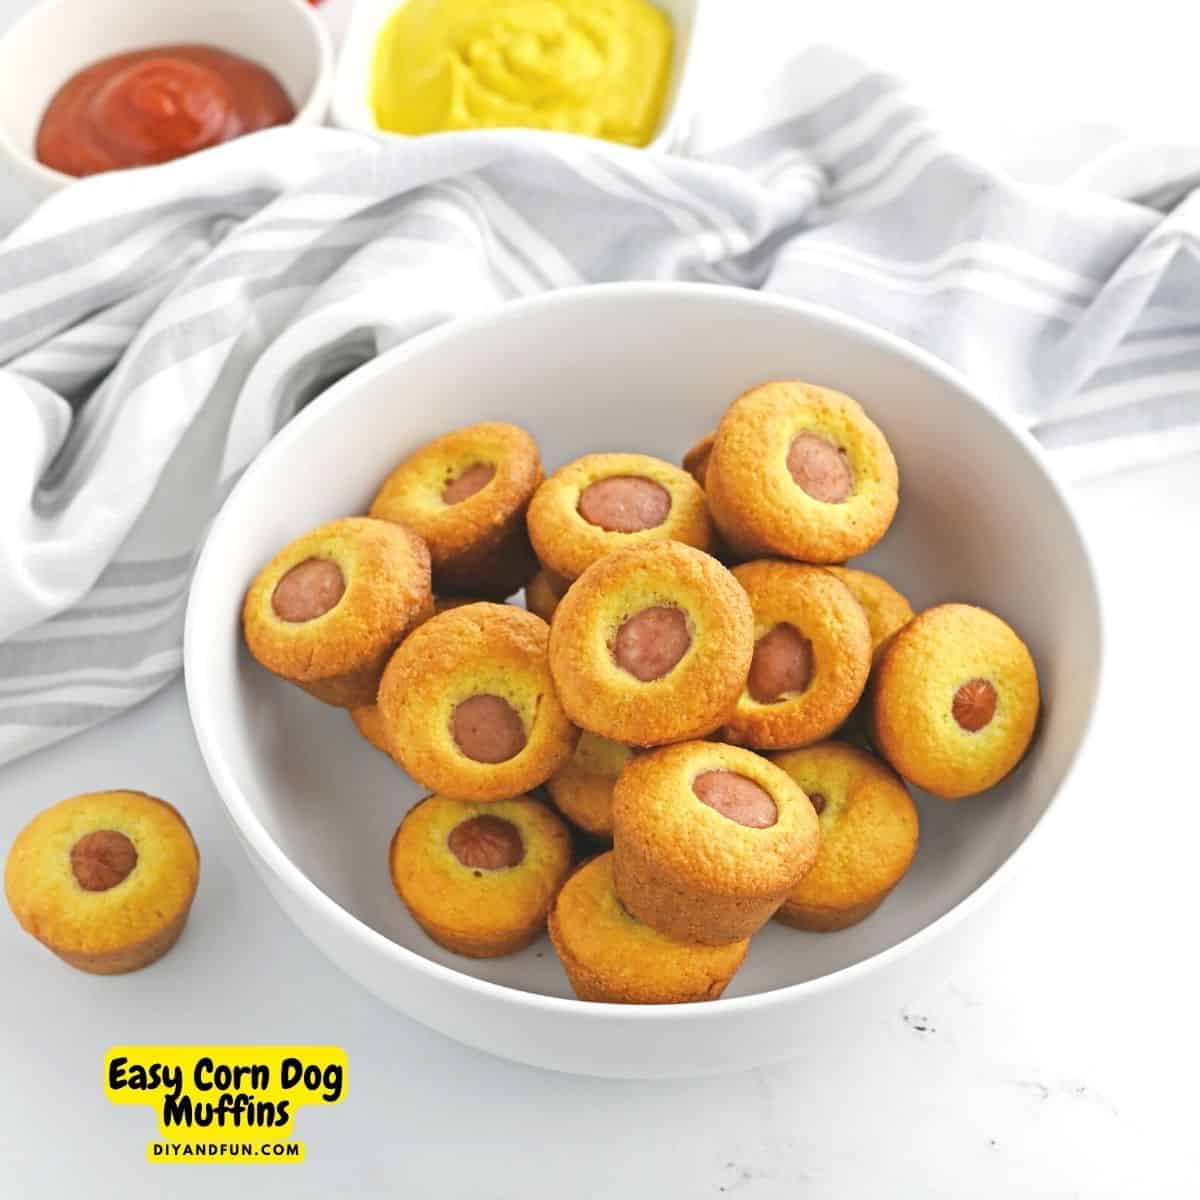 Easy Corn Dog Muffins, a simple 5 ingredient lunch, snack, or dinner recipe made with cornbread mix and hot dogs.